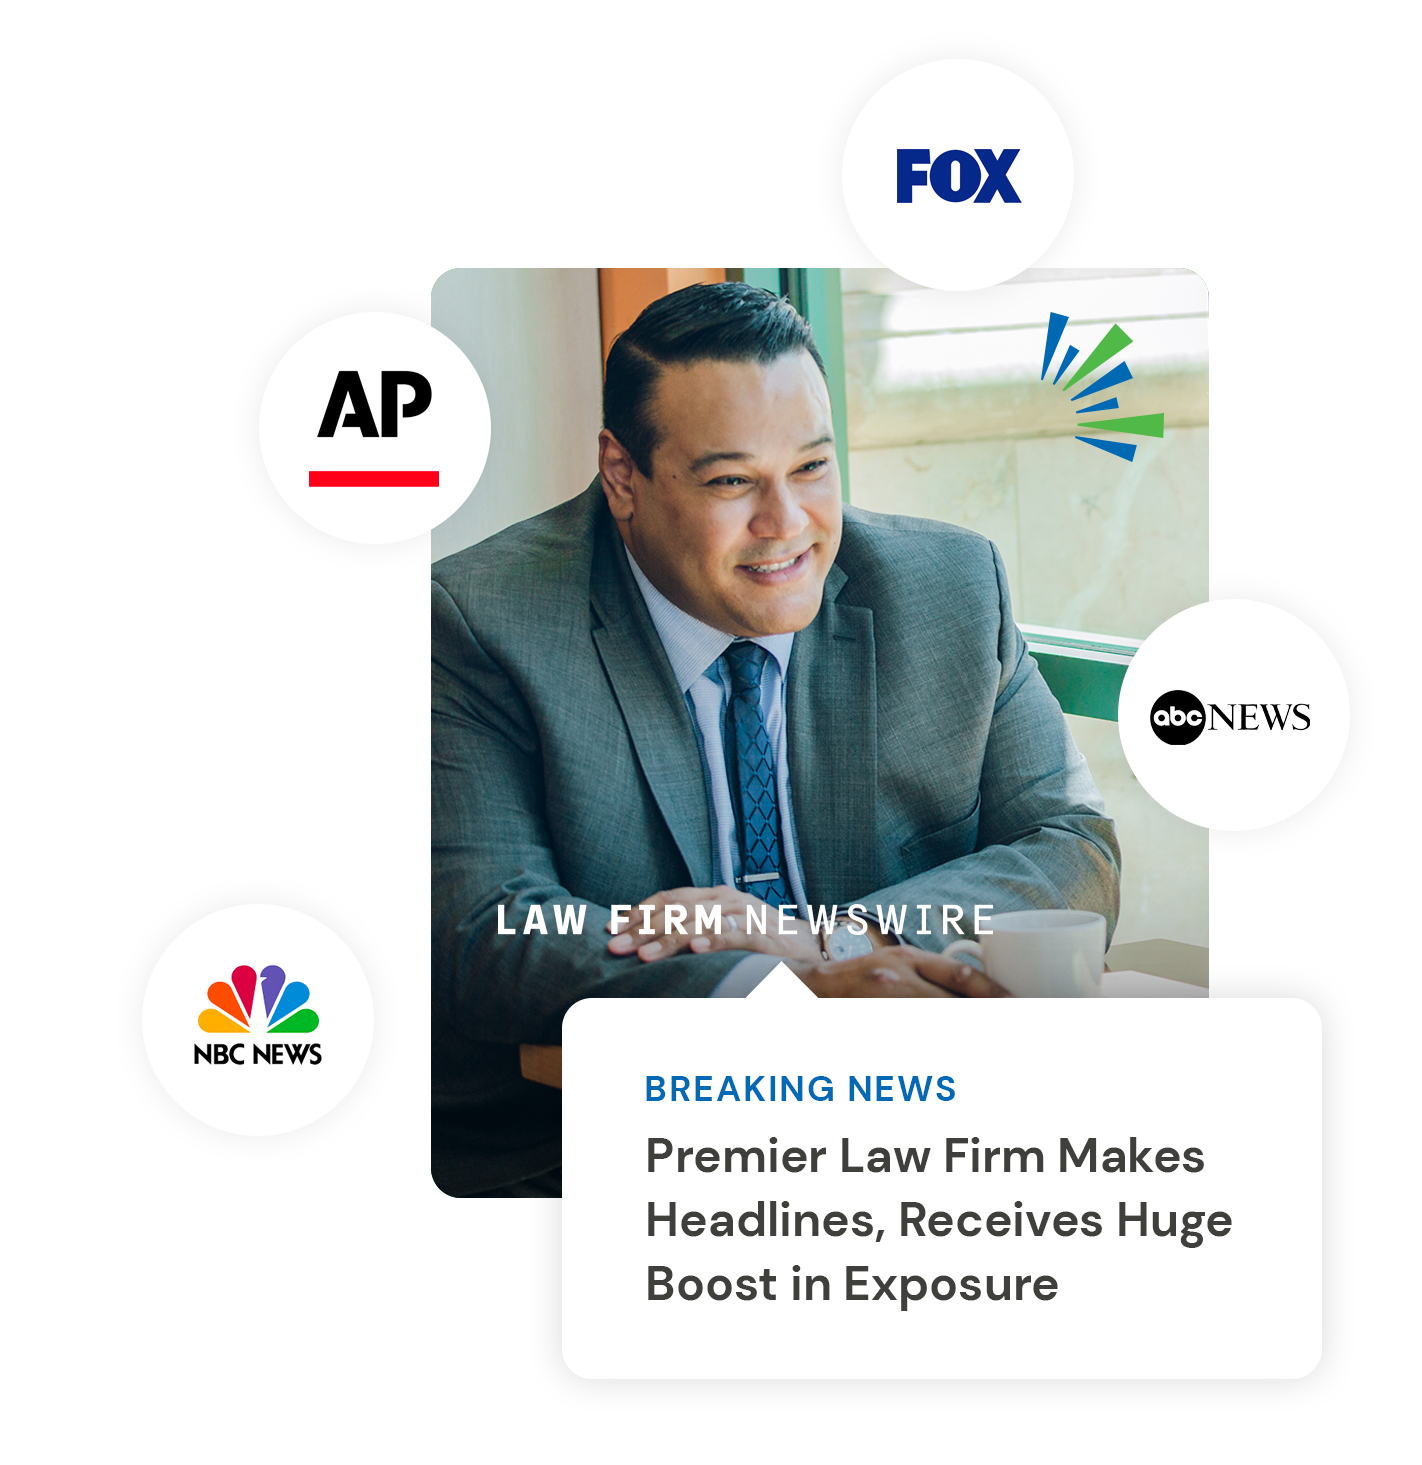 Law firm's press release featured on AP News, NBC News and ABC News